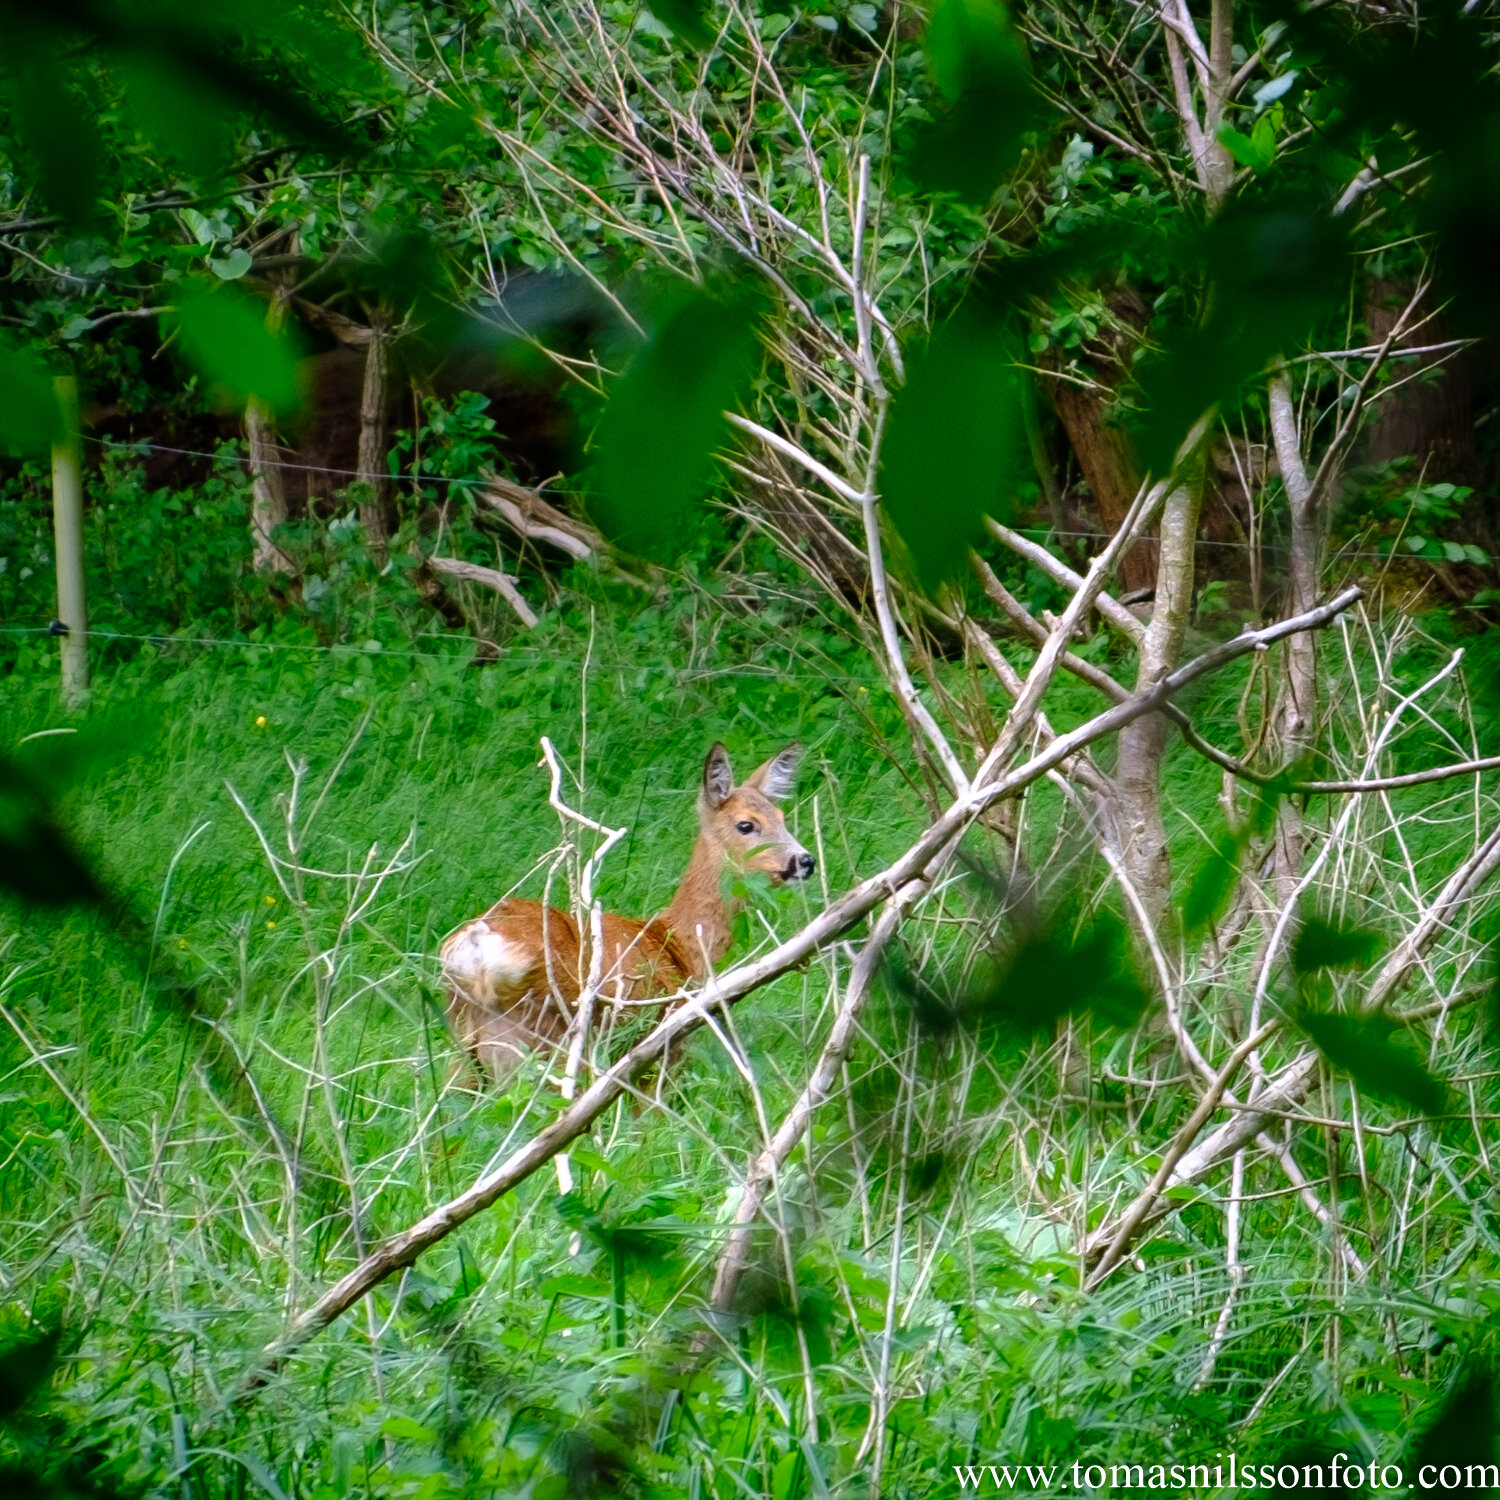 Day 155 - June 3: Fawn